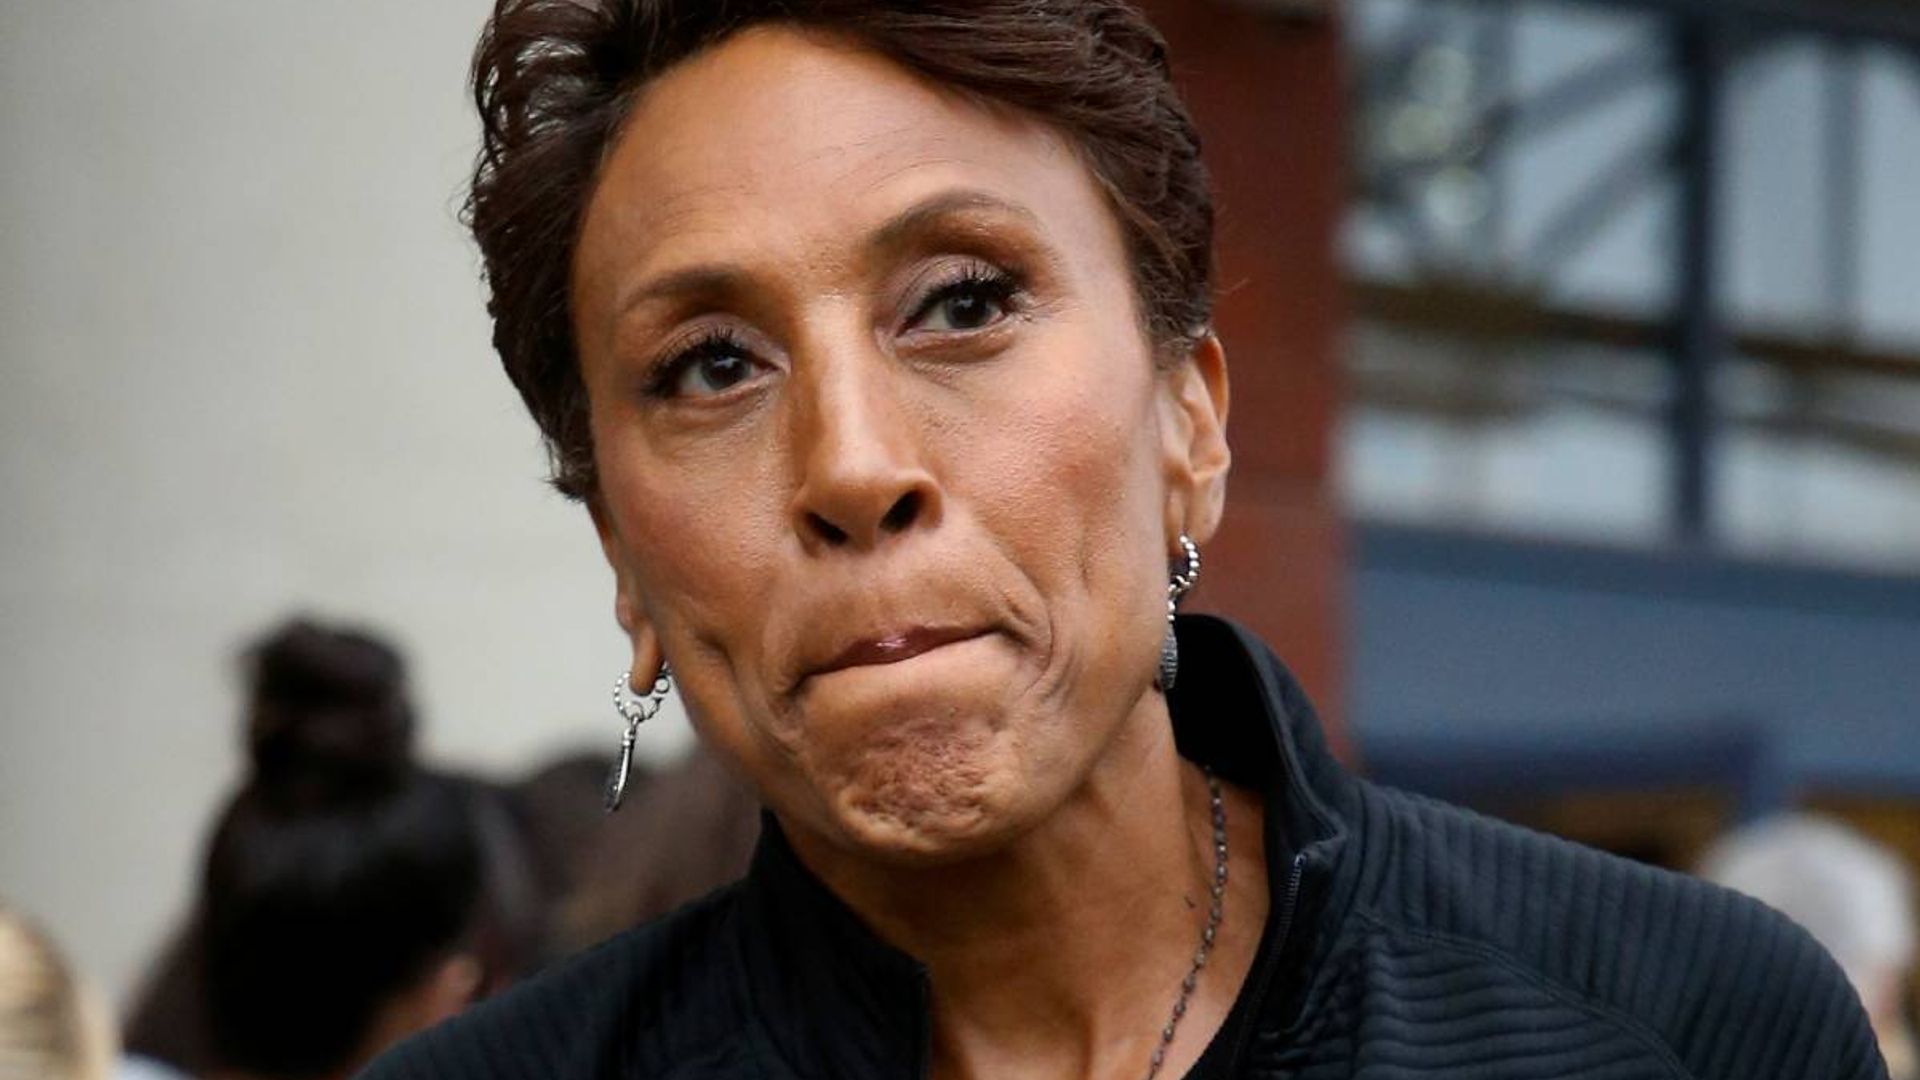 GMA’s Robin Roberts shares emotional health update away from work involving partner Amber Laign – inundated with support